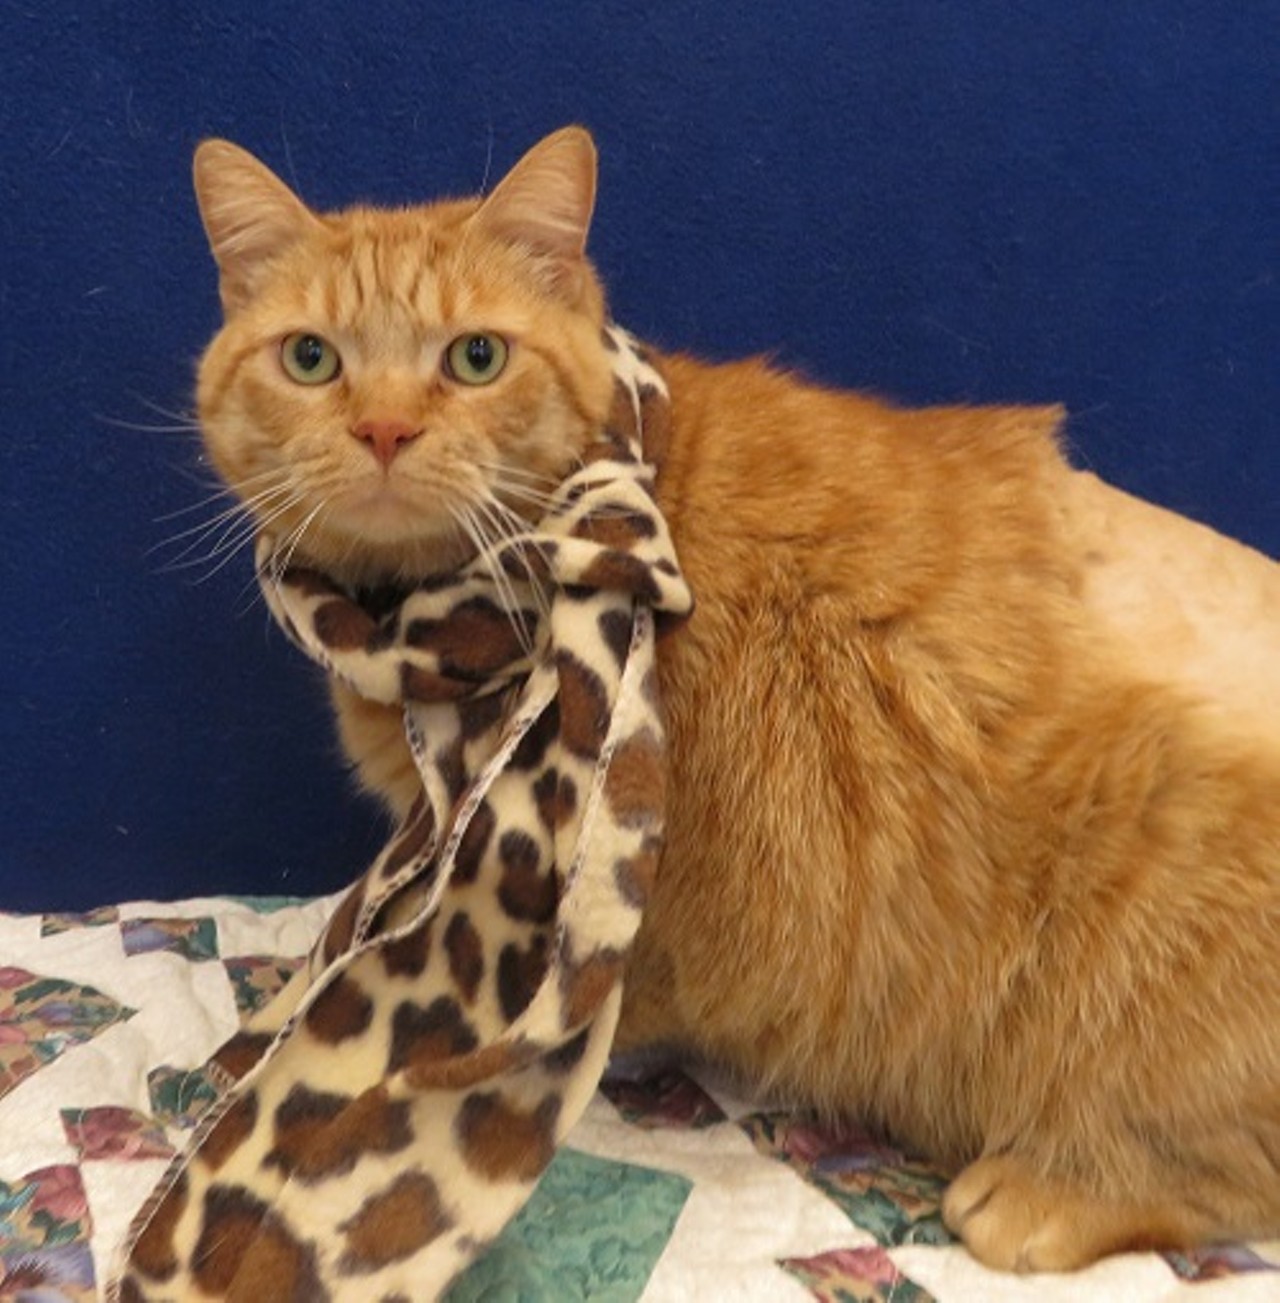 NAME: Alf
GENDER: Male
BREED: Domestic Short Hair
AGE: 8 years
WEIGHT: 19 pounds
SPECIAL CONSIDERATIONS: None
REASON I CAME TO MHS: Owner surrender
LOCATION: Petco of Sterling Heights
ID NUMBER: 864302